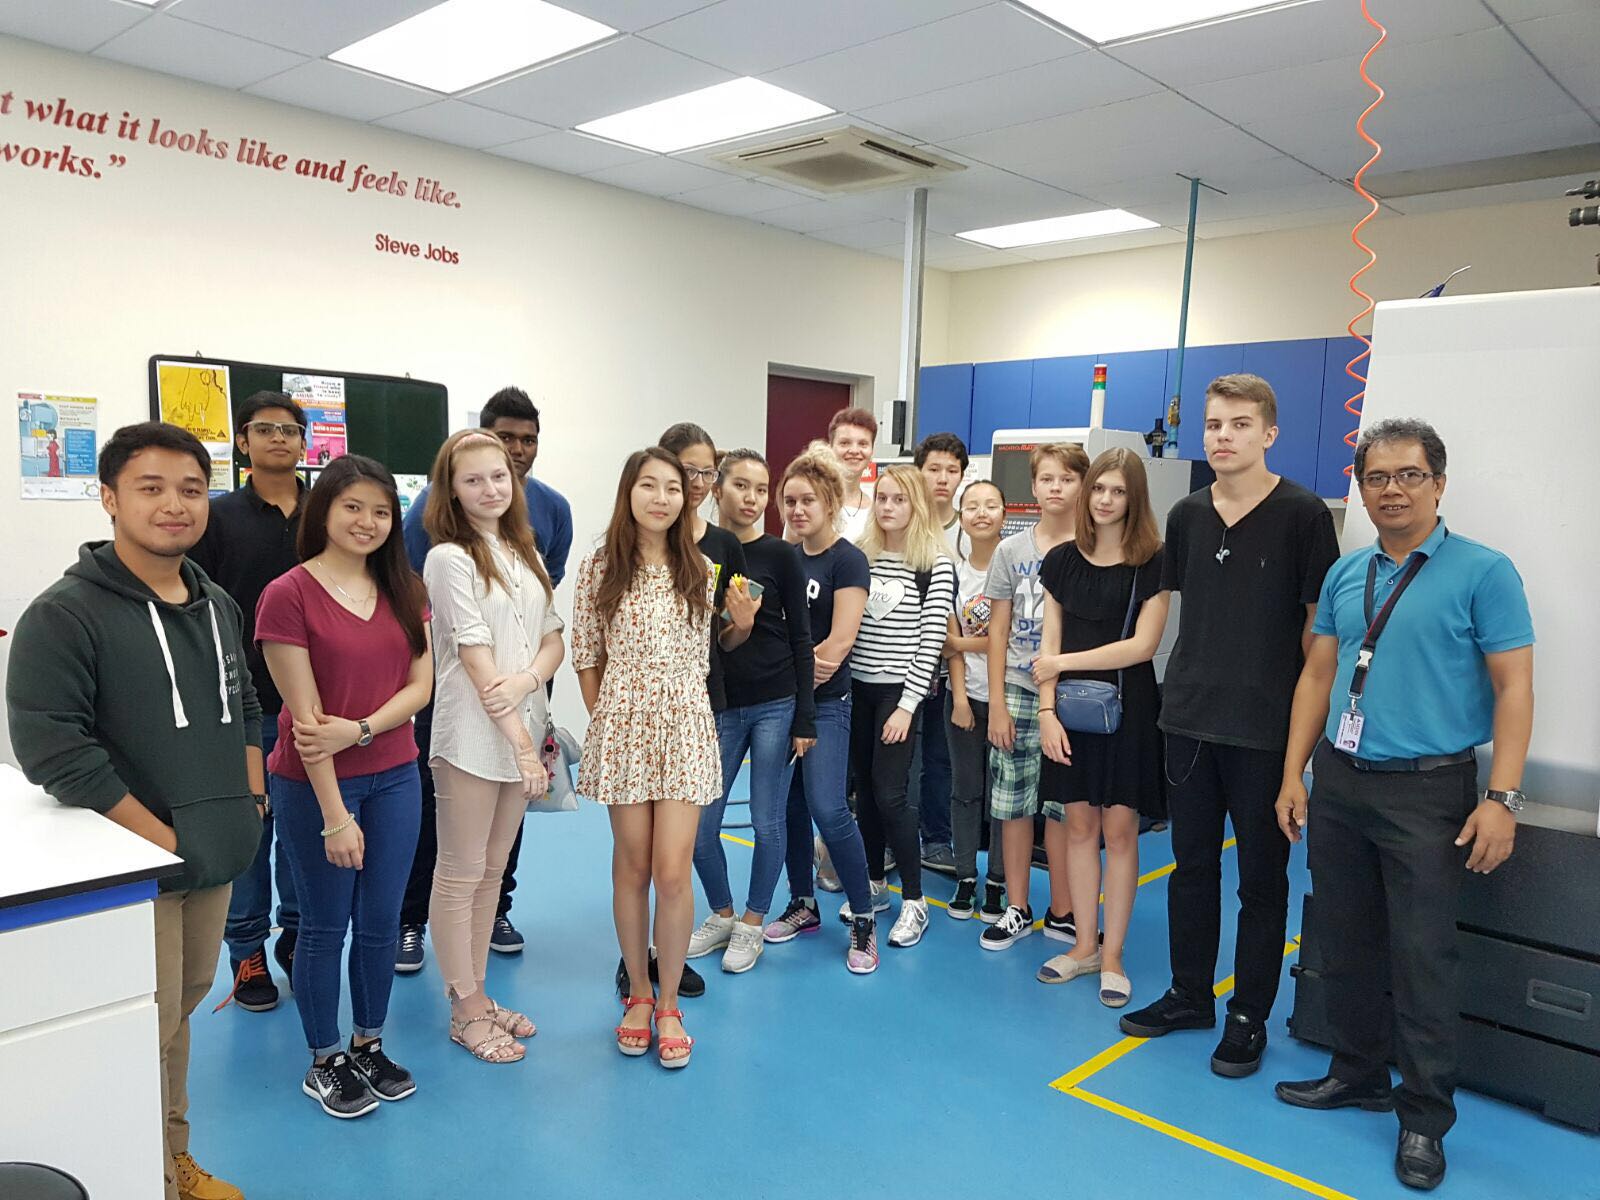 A group of students posing together for a picture in the engineering lab.